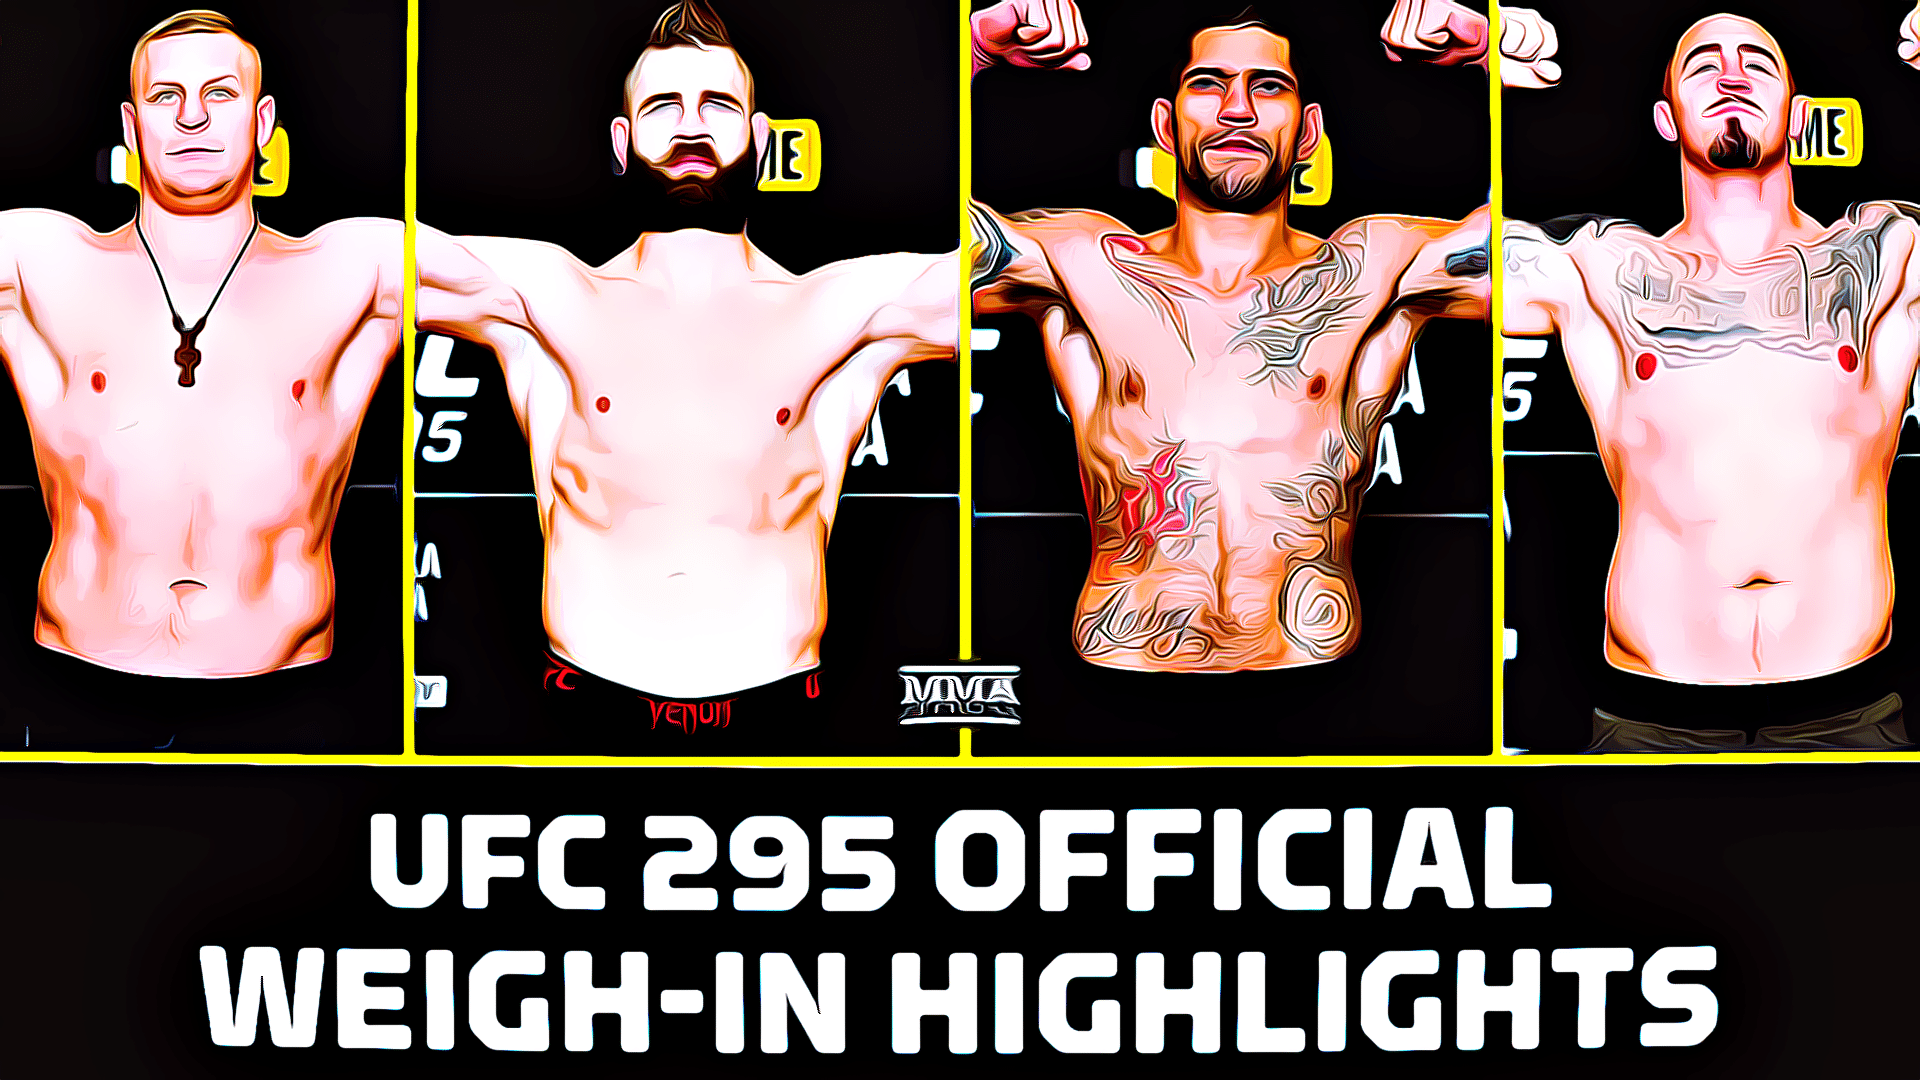 UFC 295 Championship Fights Are On and 2 Fighters Didn't Make Weight